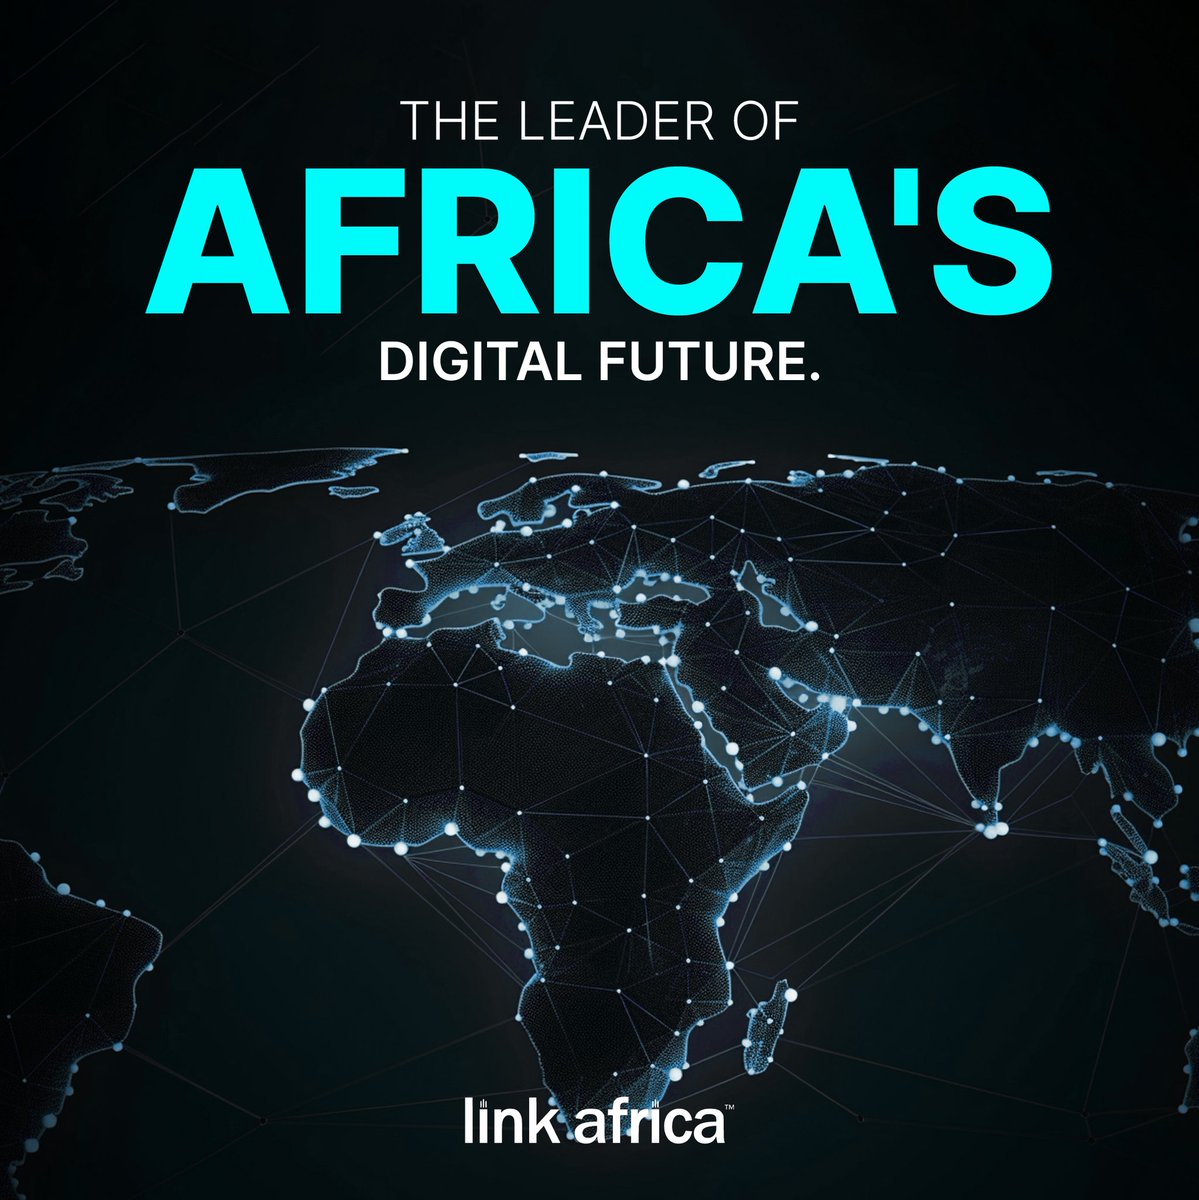 Empowering Africa's Digital Revolution with advanced fiber connectivity.

Your trusted partner for unlocking potential.
Embrace transformation, and seize endless opportunities!: linkafrica.co.za

#UnleashAfrica #DigitalRevolution #LinkAfrica #FiberConnectivity